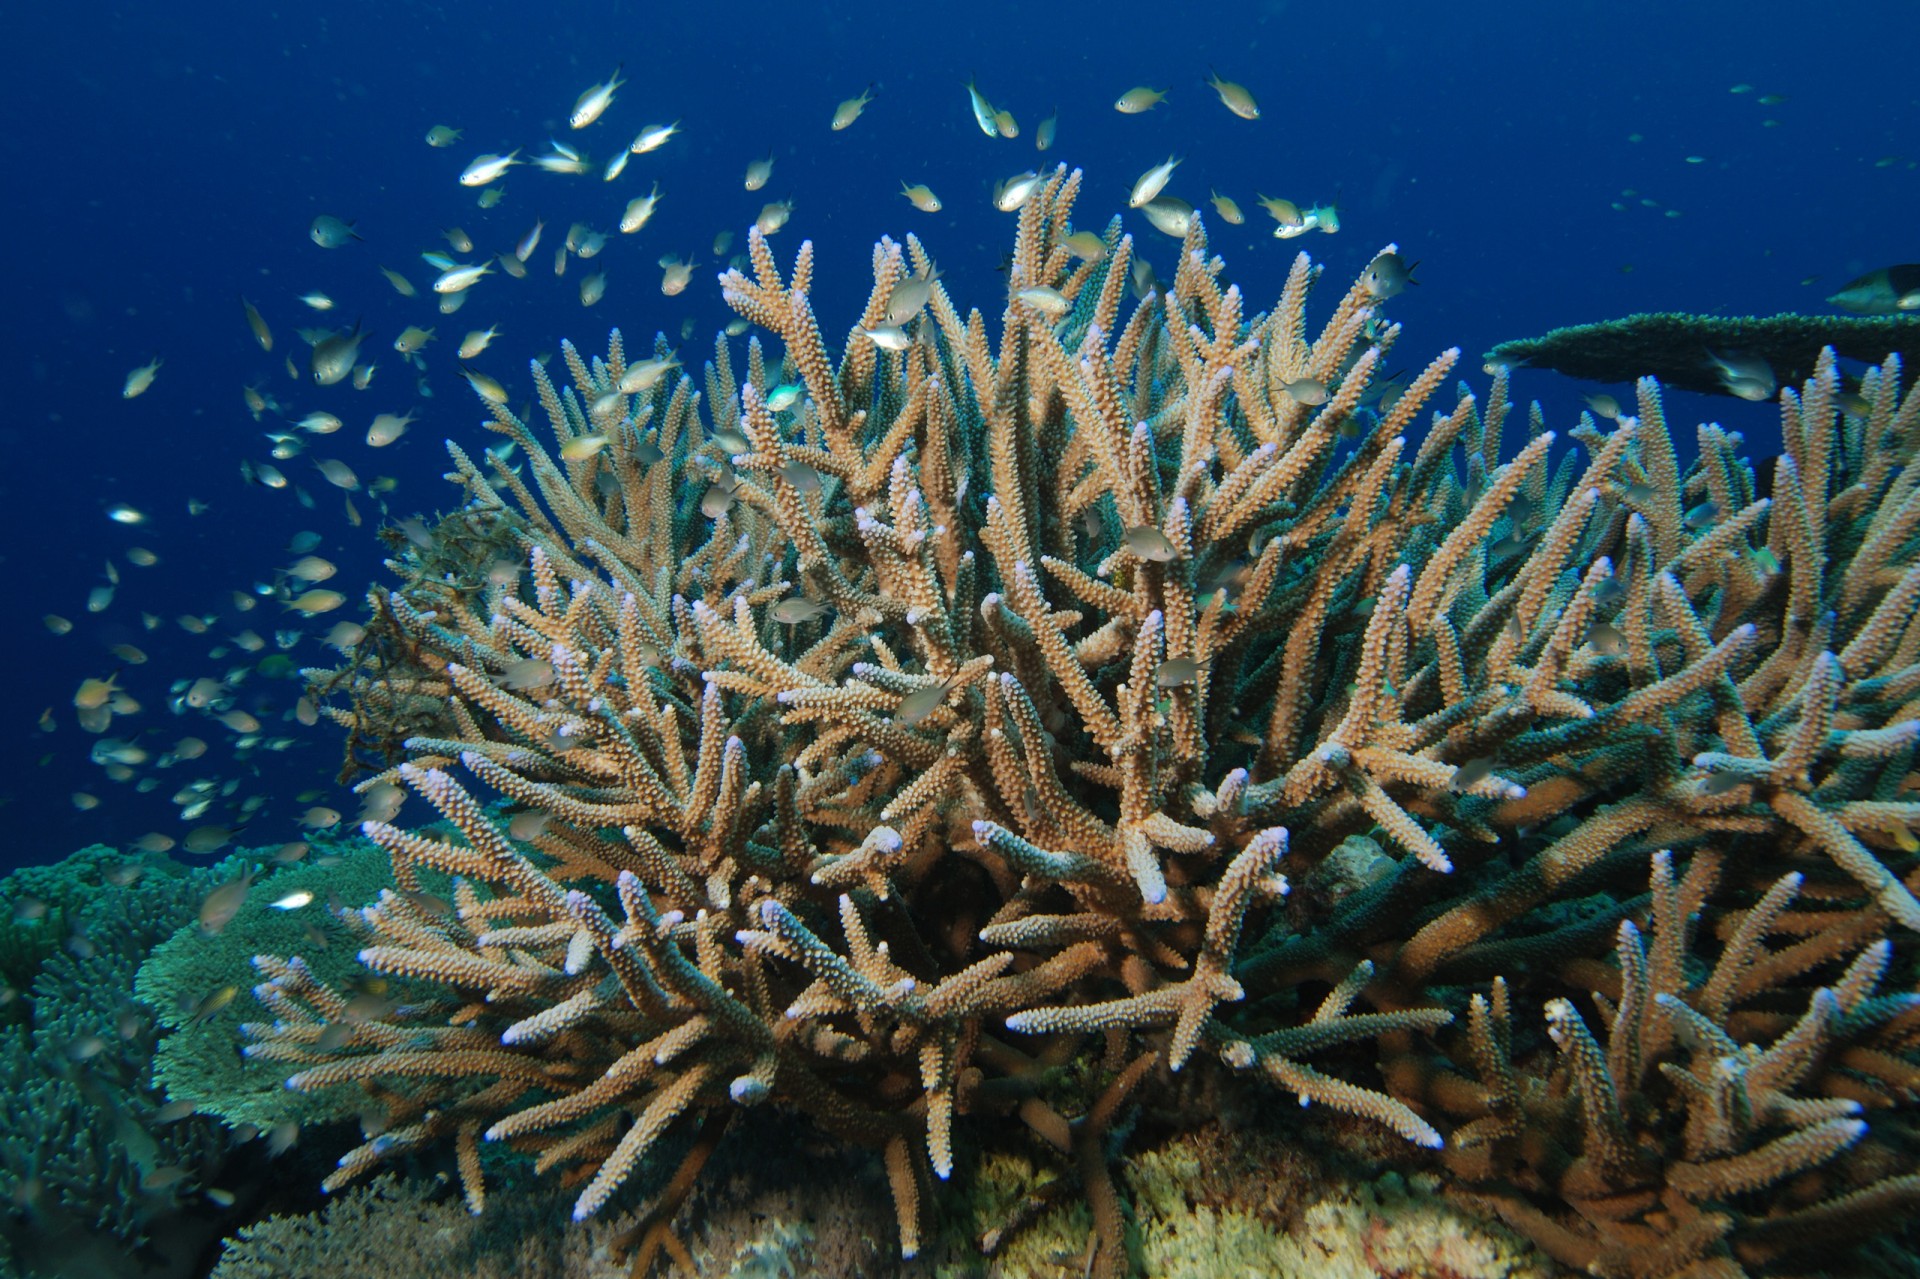 Coral-microbiome relationships